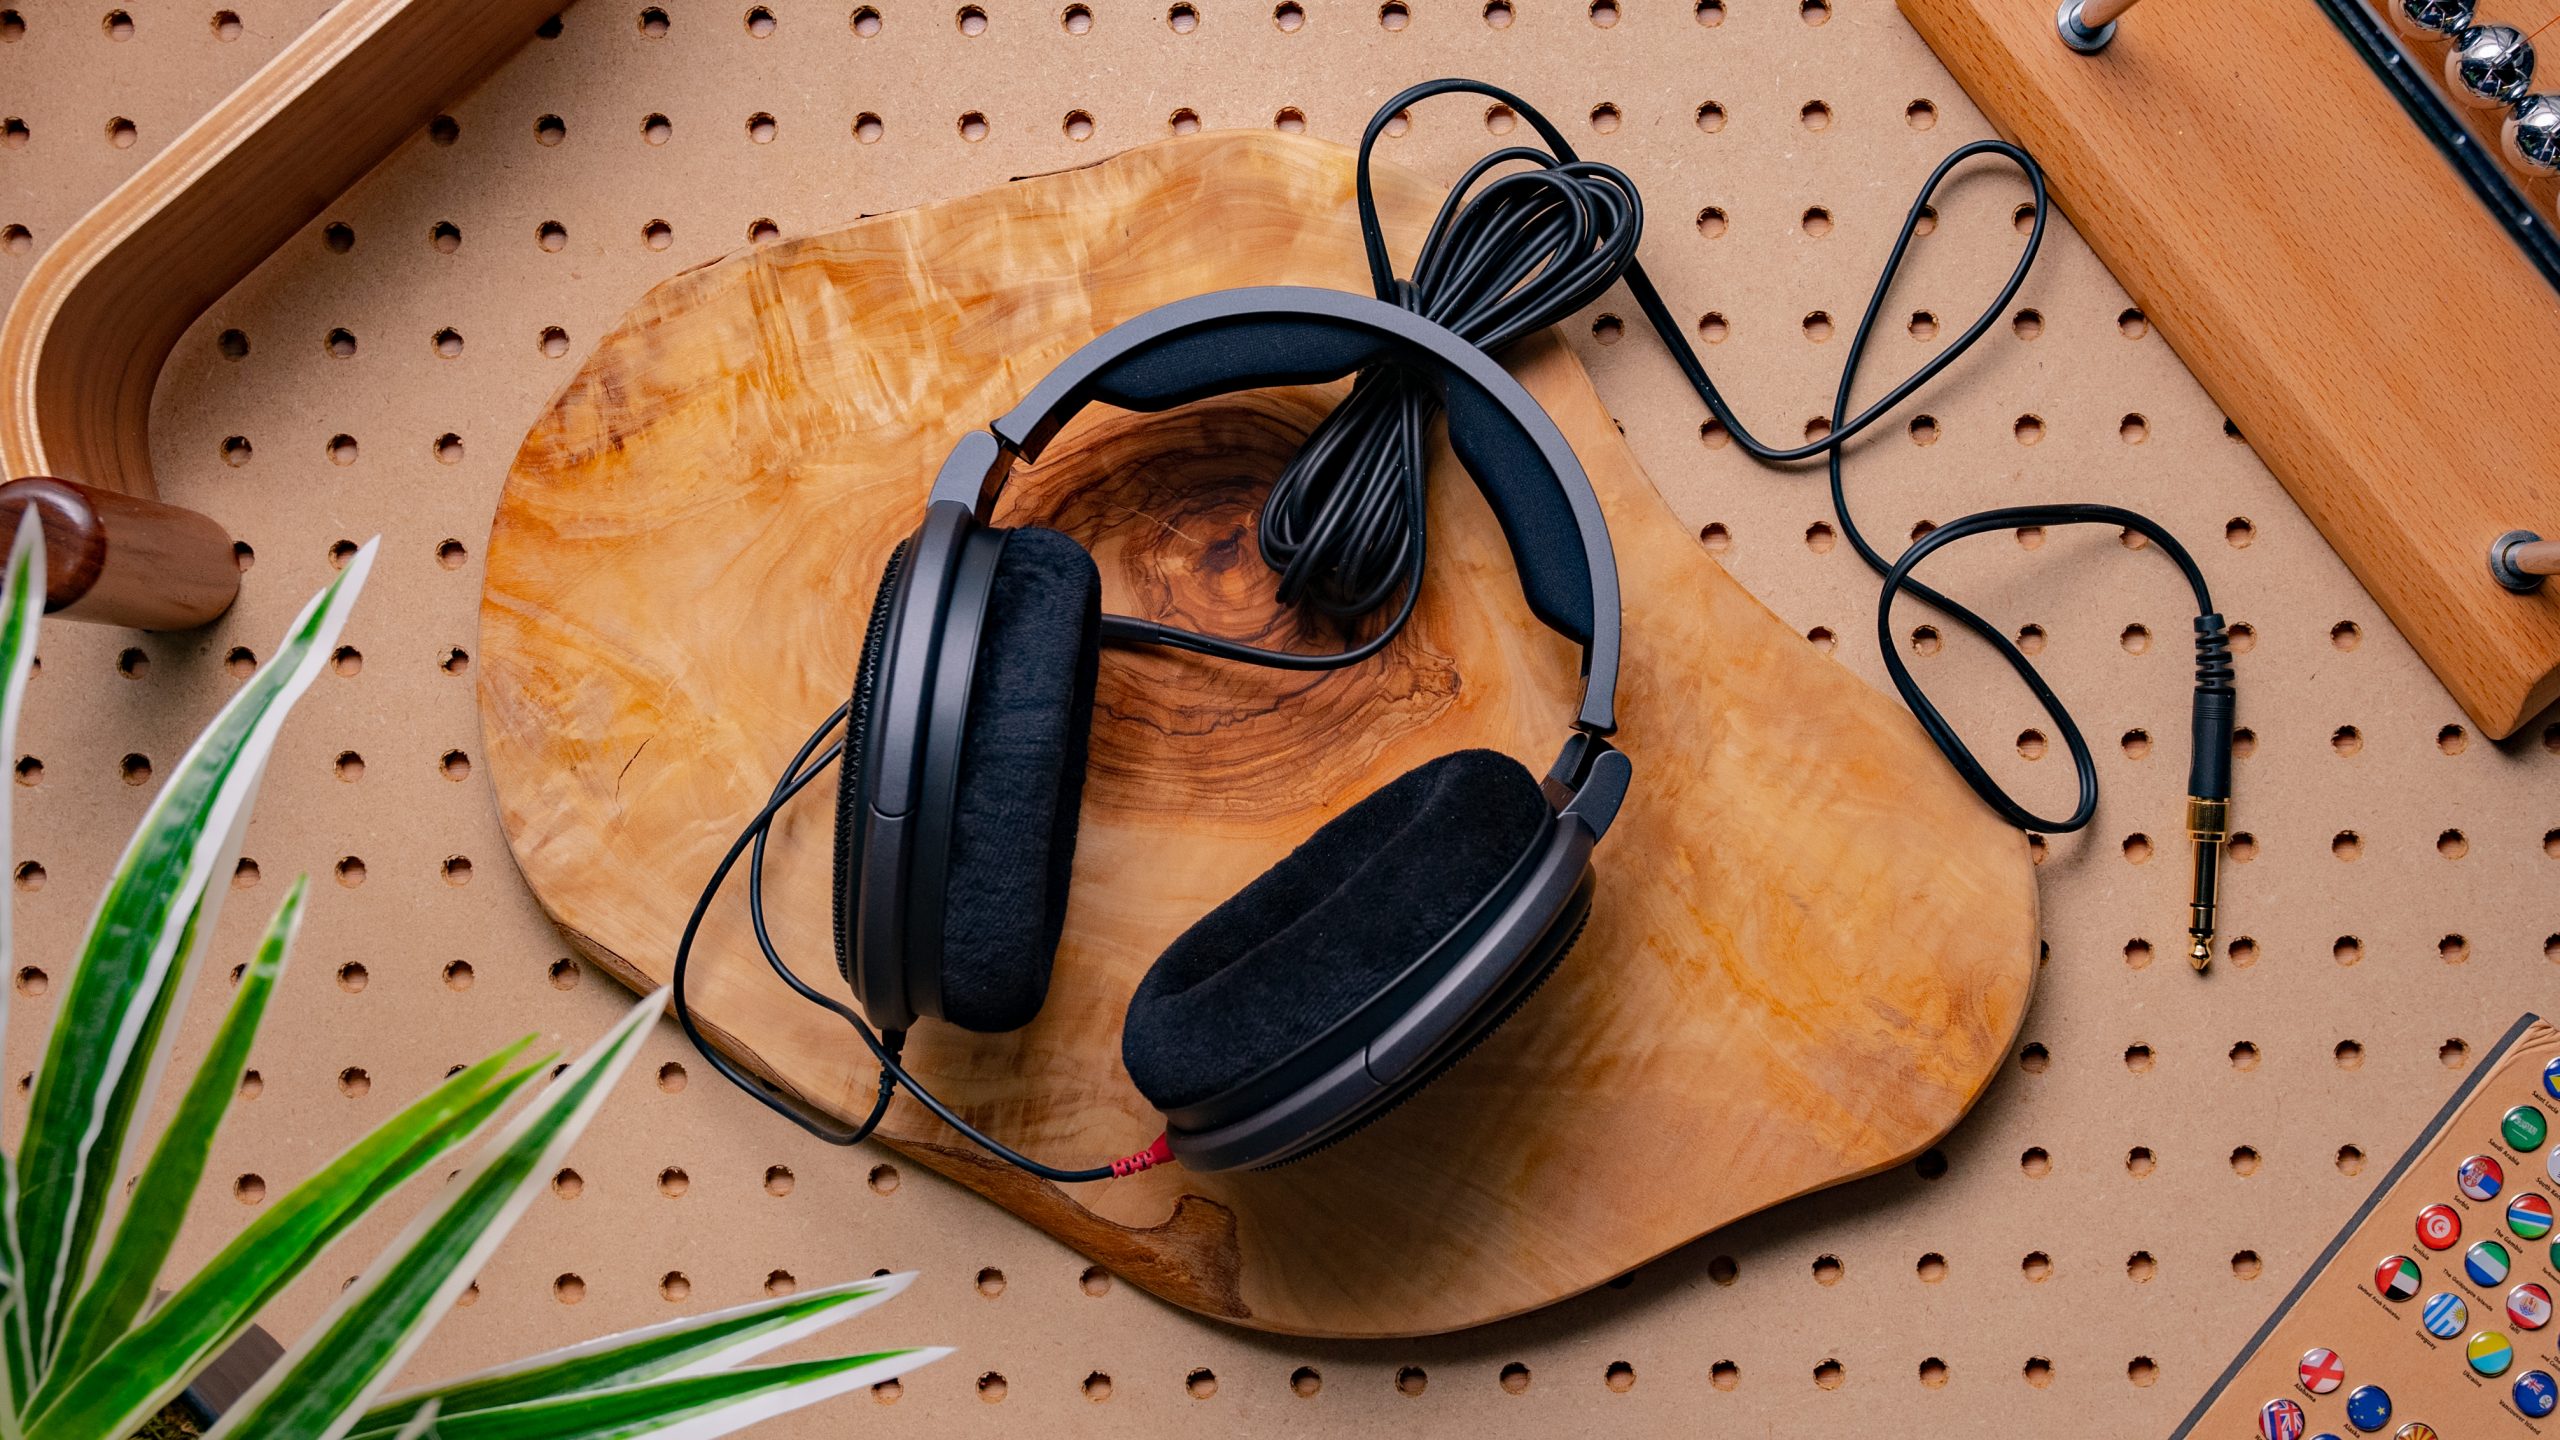 Sennheiser HD600 vs HD660s vs HD650 which headphones are best for you? 